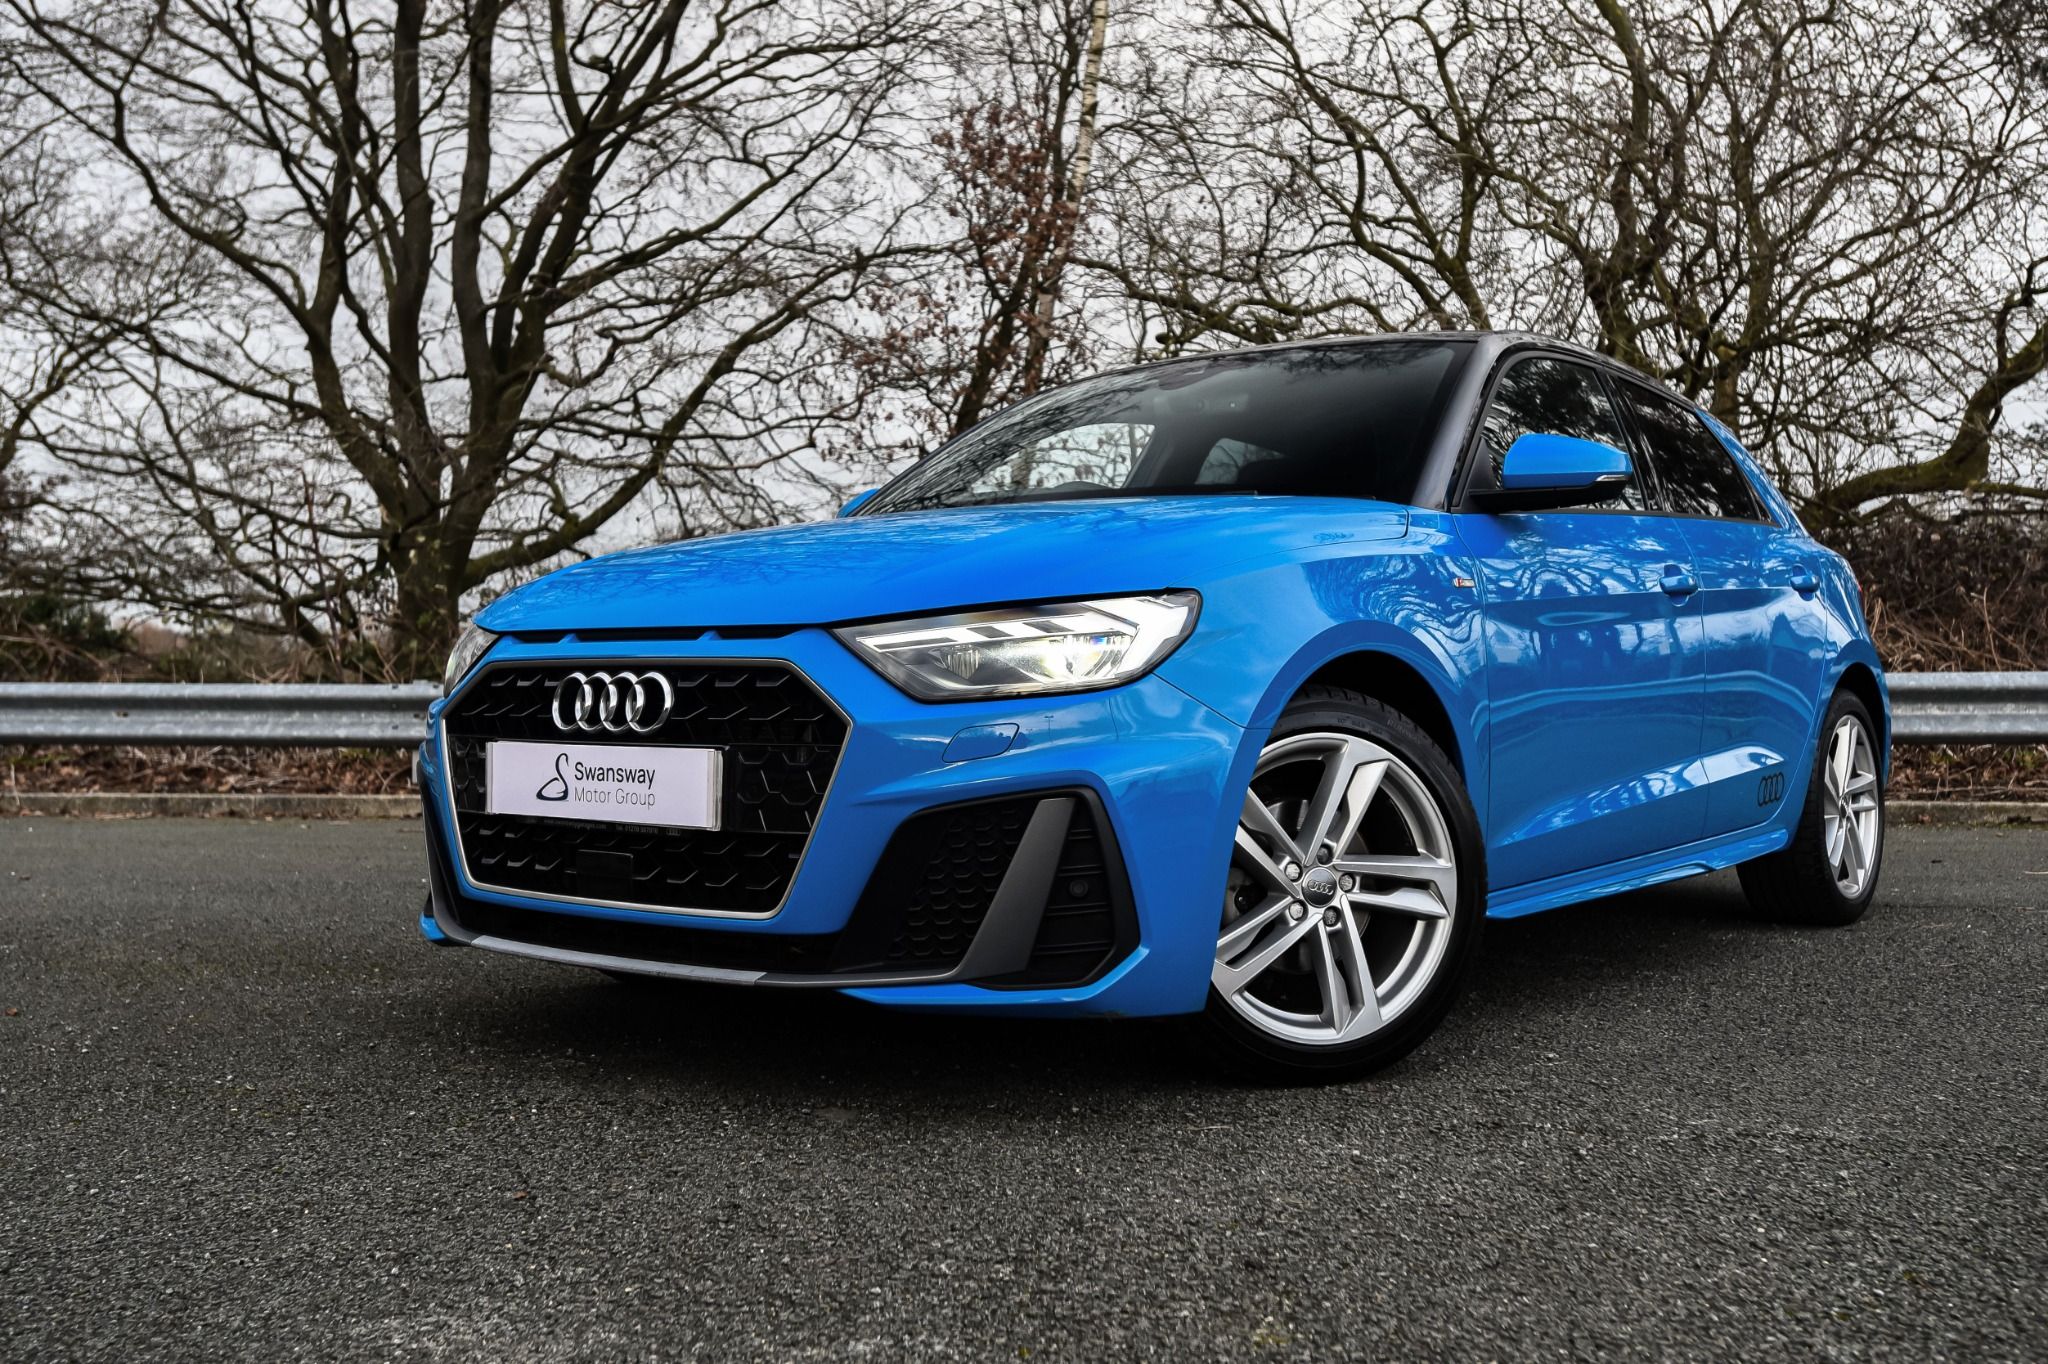 Front view of Audi A1 Sportback